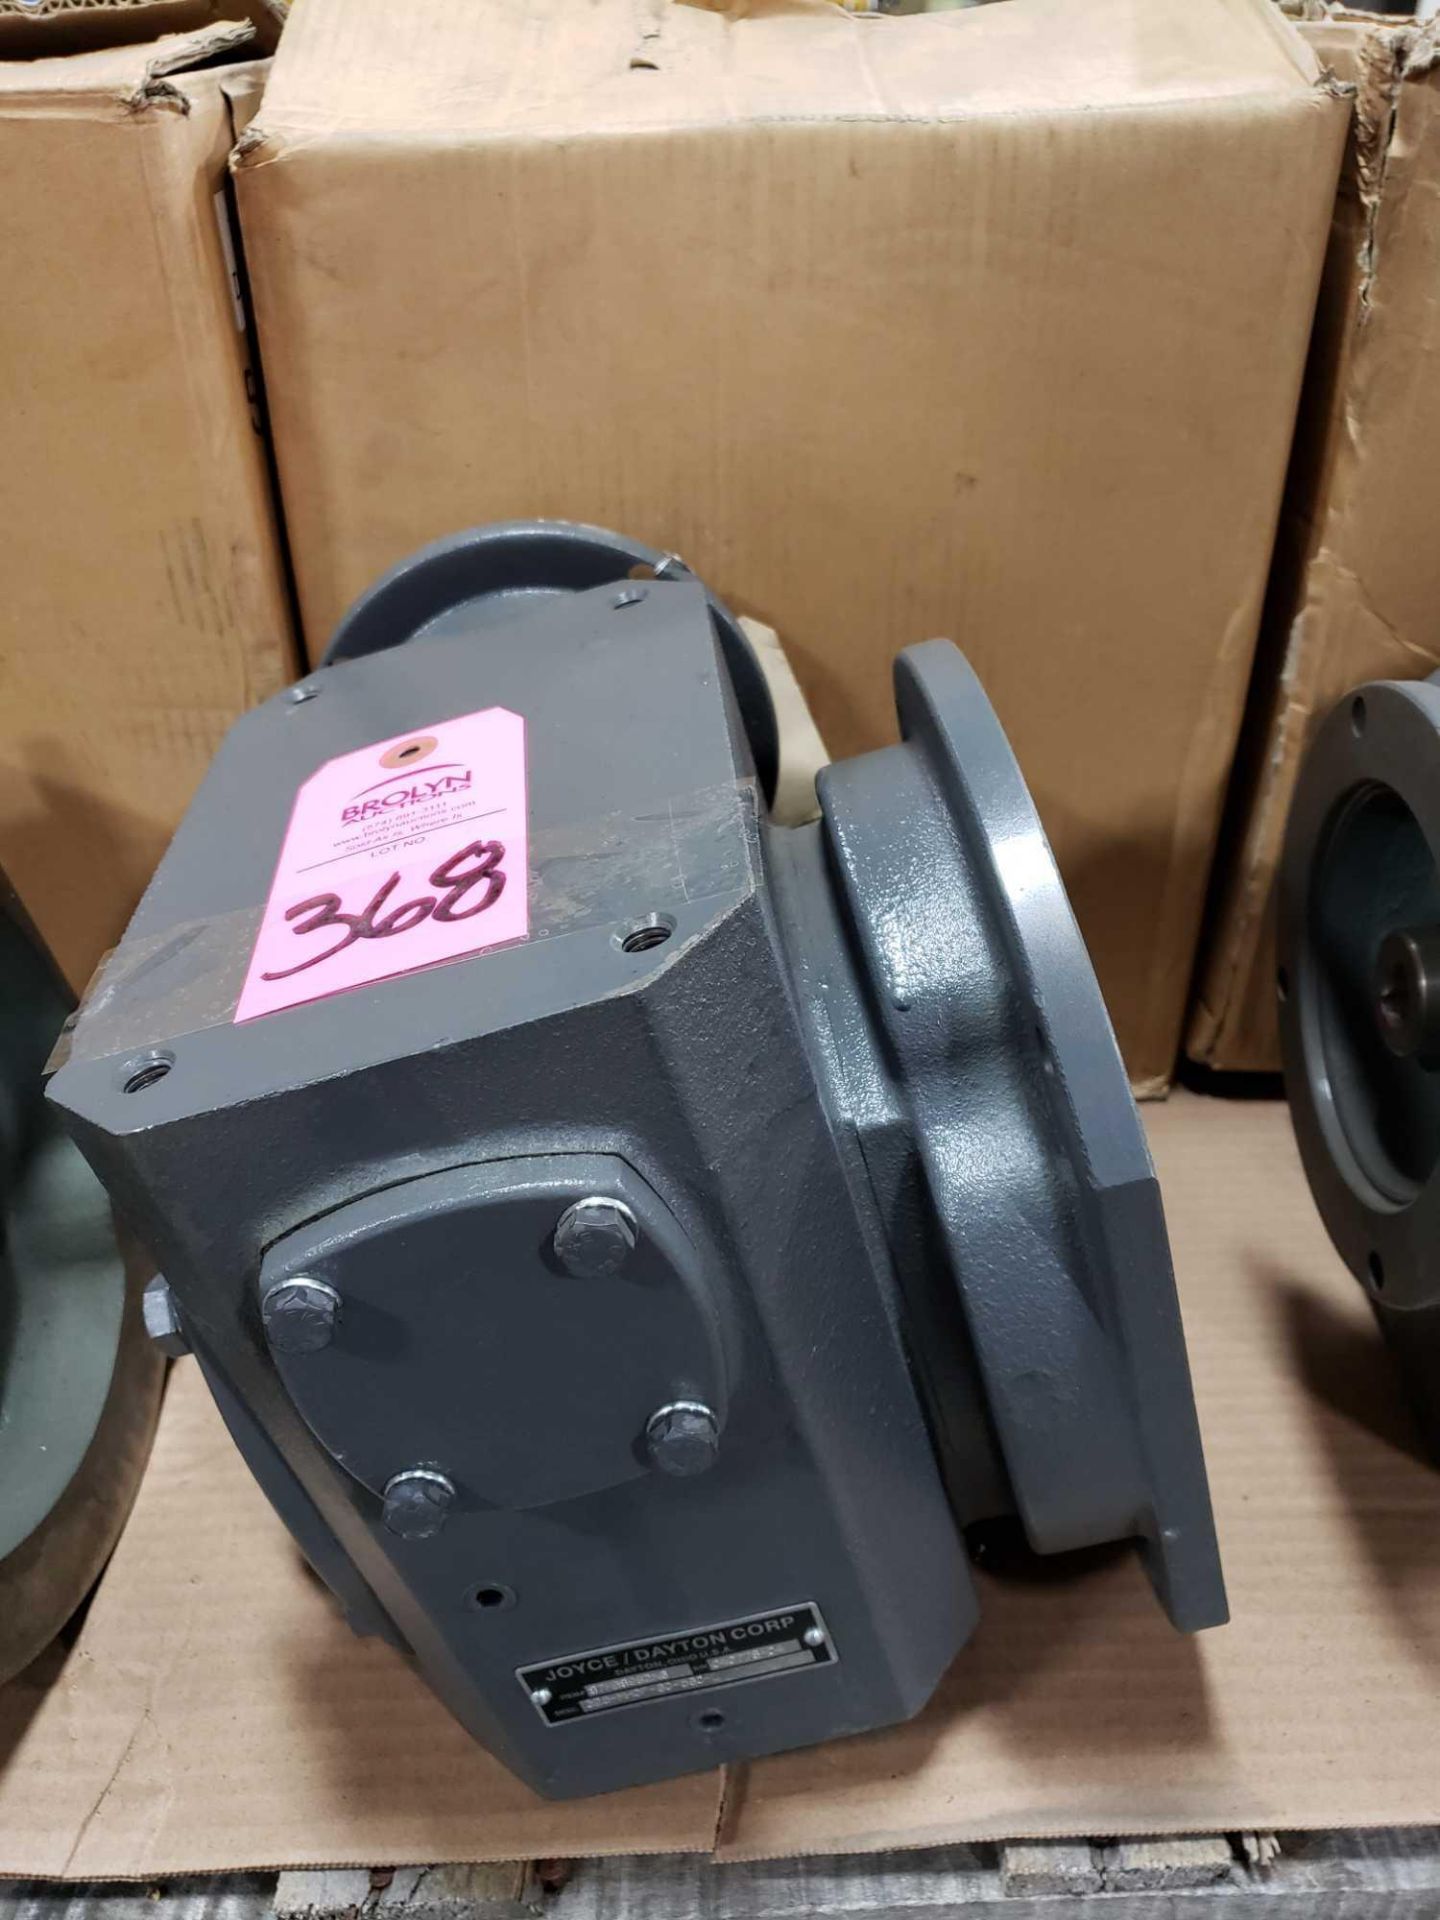 Joyce Dayton gearbox worm gear speed reducer model 325-MHOF-60-56C-L. New as pictured.